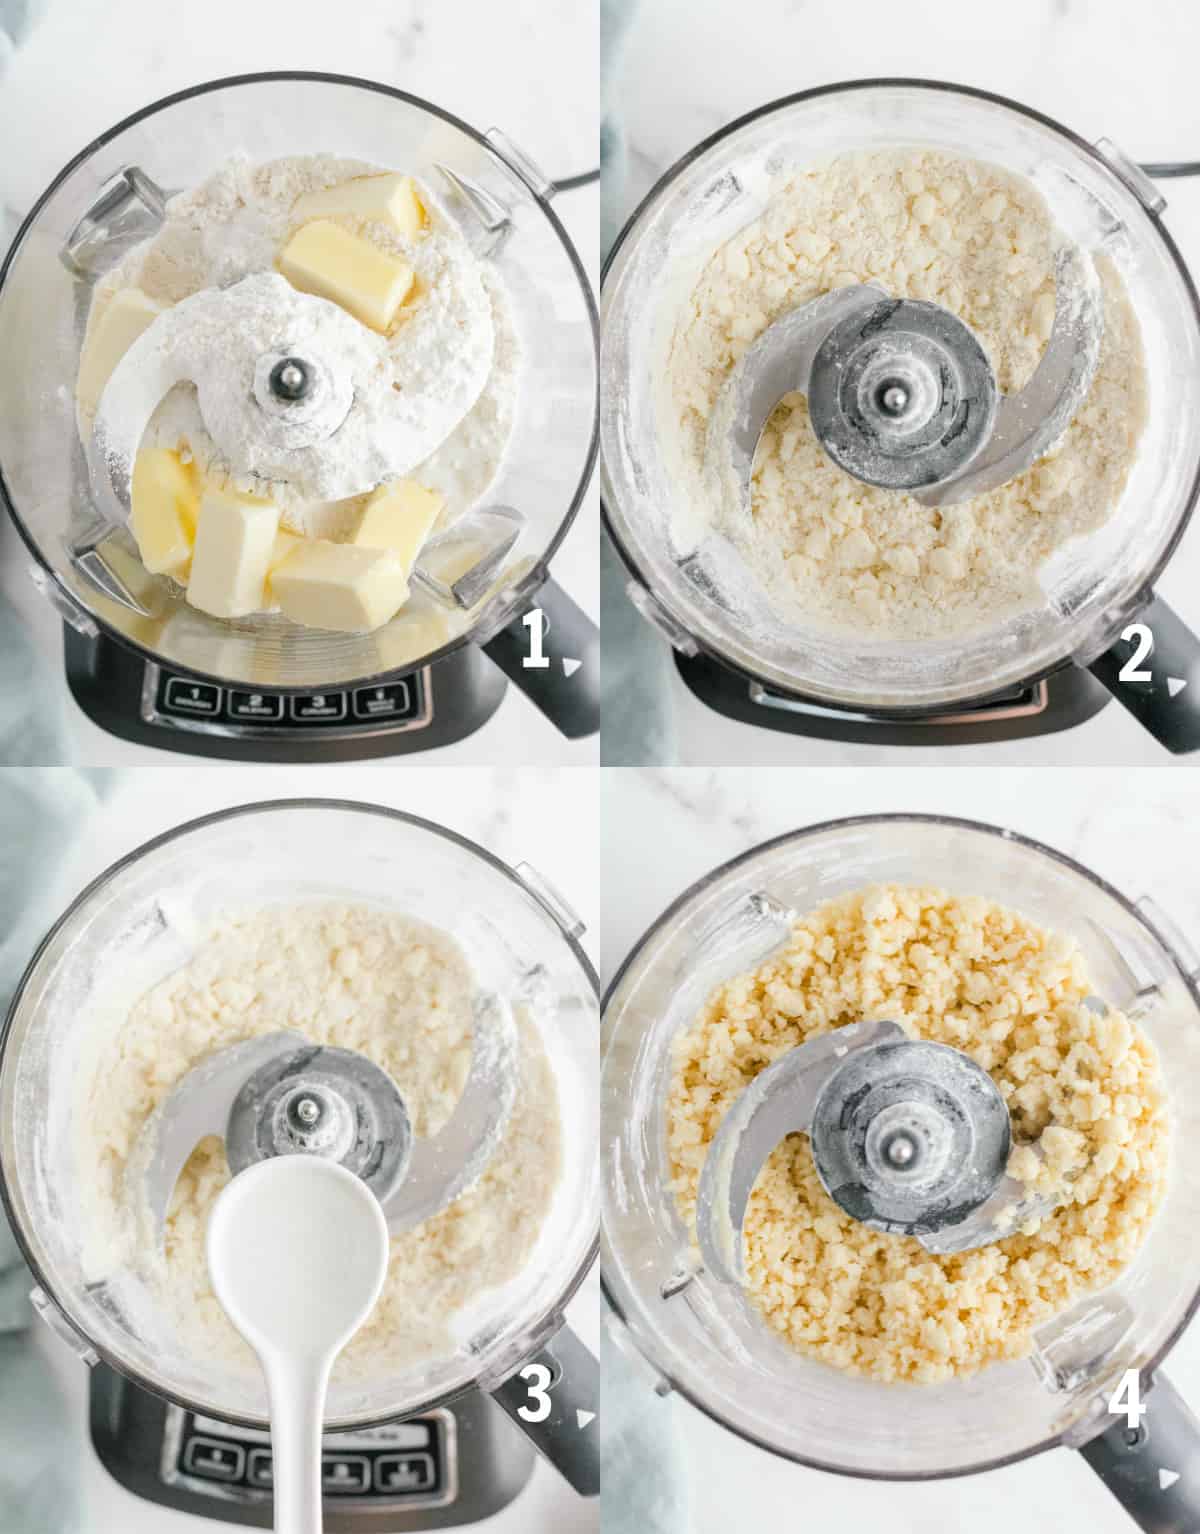 mixing together the pie dough in a food processor